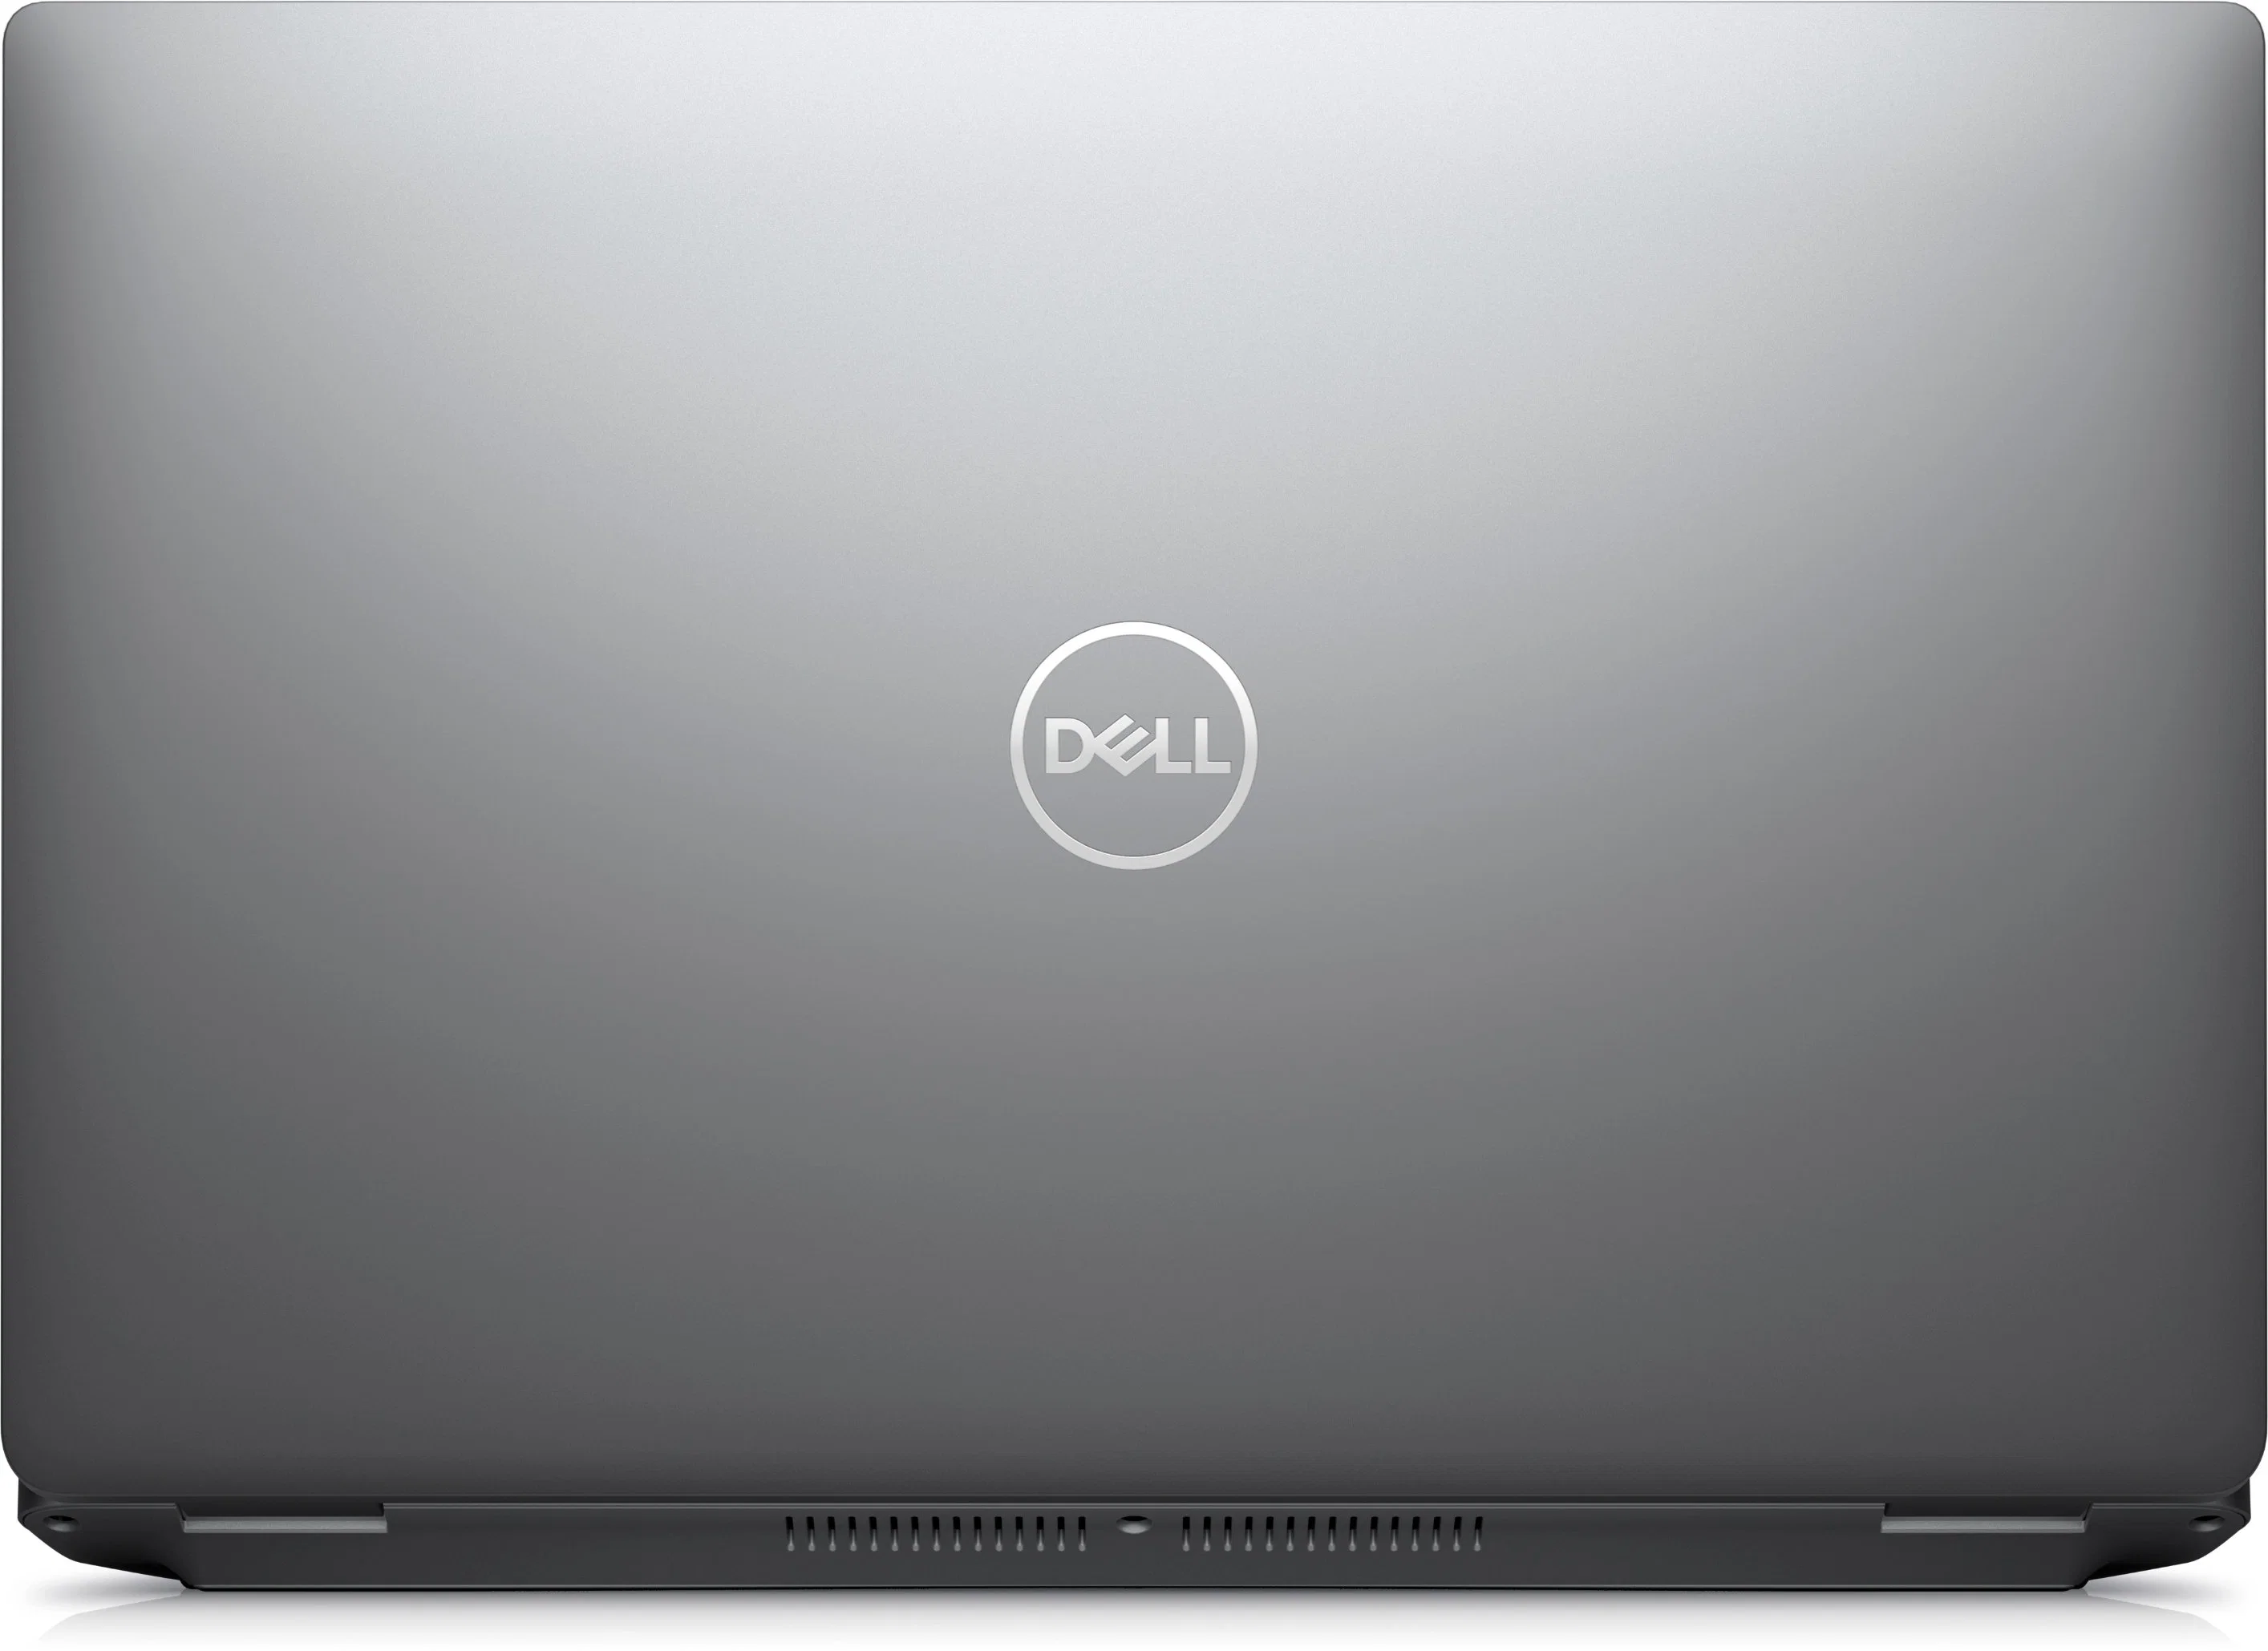 New Produce Latest DELL Precision 3470 Mobile Workstation Laptop